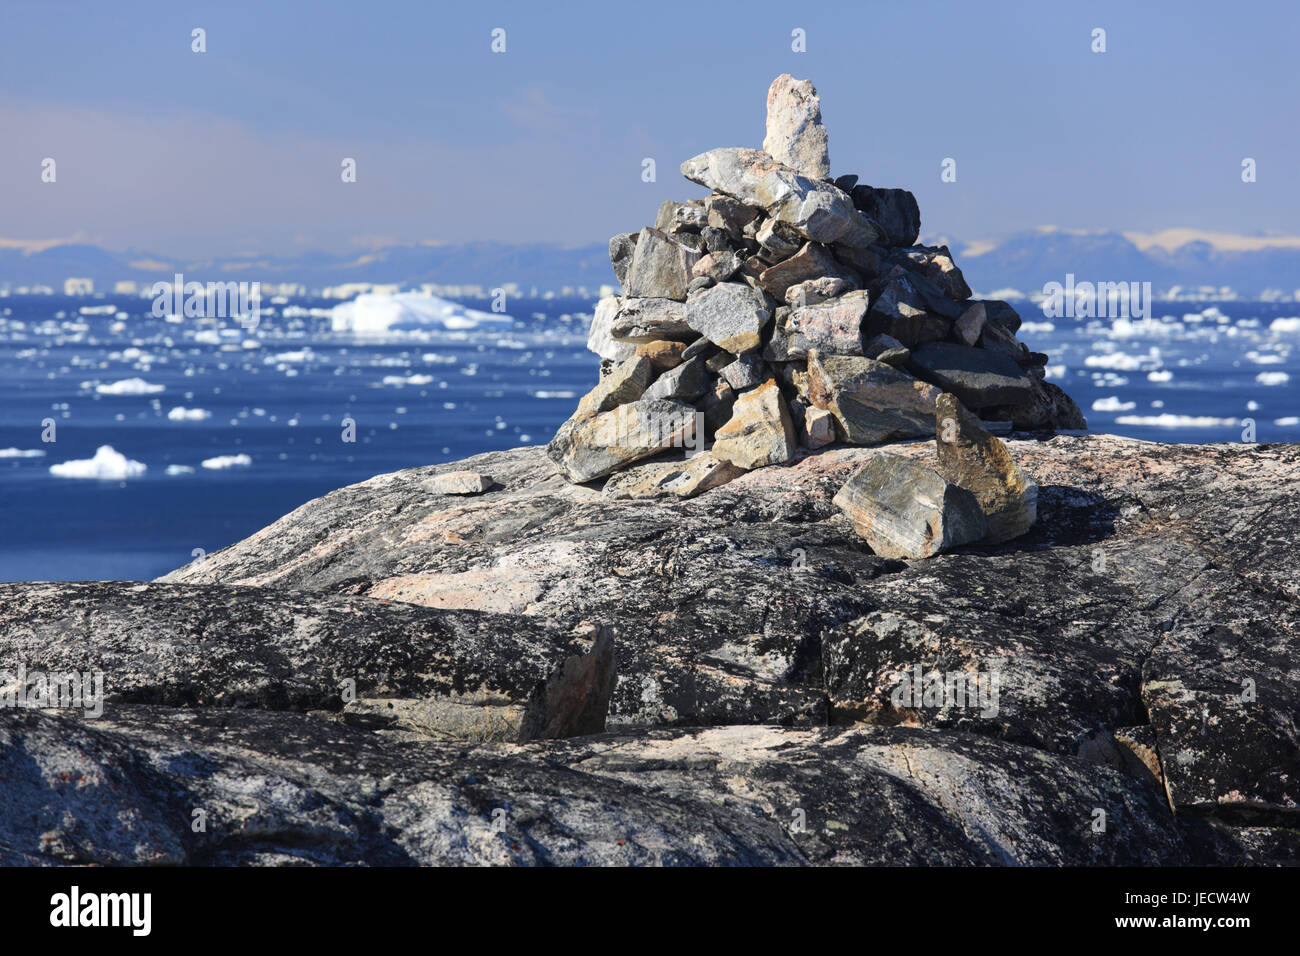 Greenland, Disco Bay, Ilulissat, fjord, icebergs, rocks, road selection, Inukshuk, Western Greenland, shore, coast, outside, deserted, water, sea, the Arctic, ice, drift ice, climate change, stone heap, stone little man, selection, Stock Photo